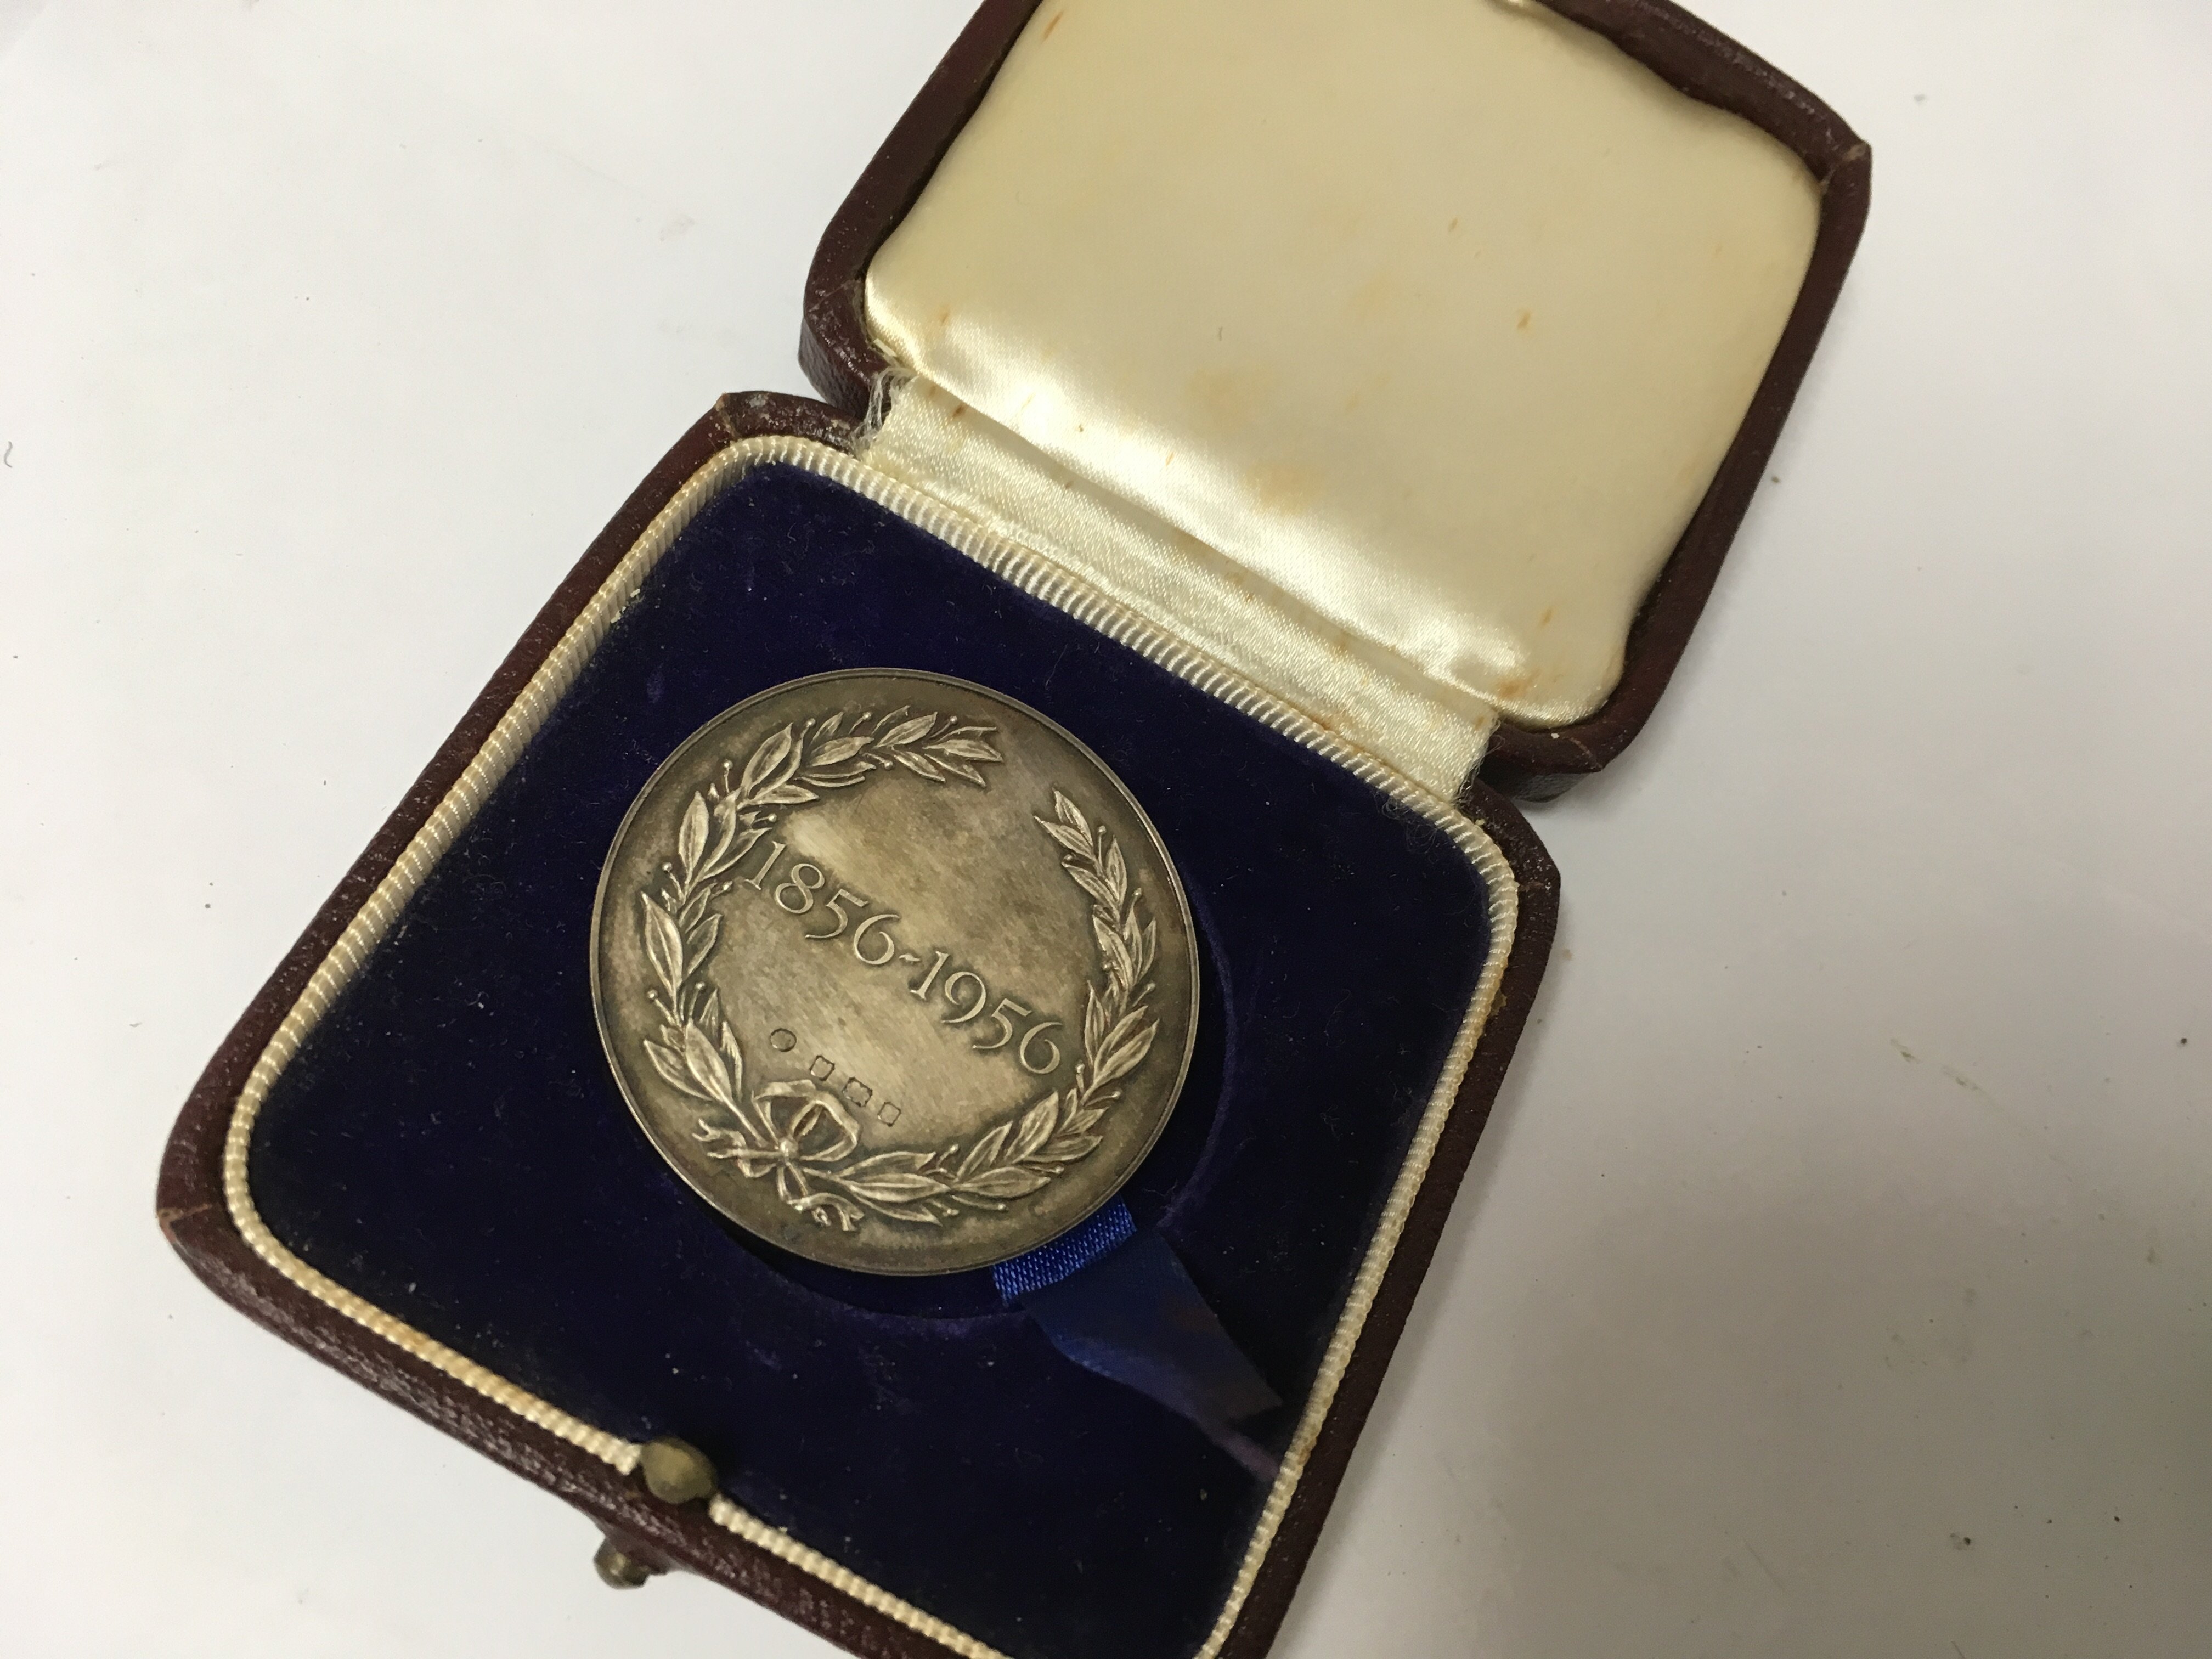 A Silver British Indian steam navigation medallion in original case and a small collection of - Image 2 of 3